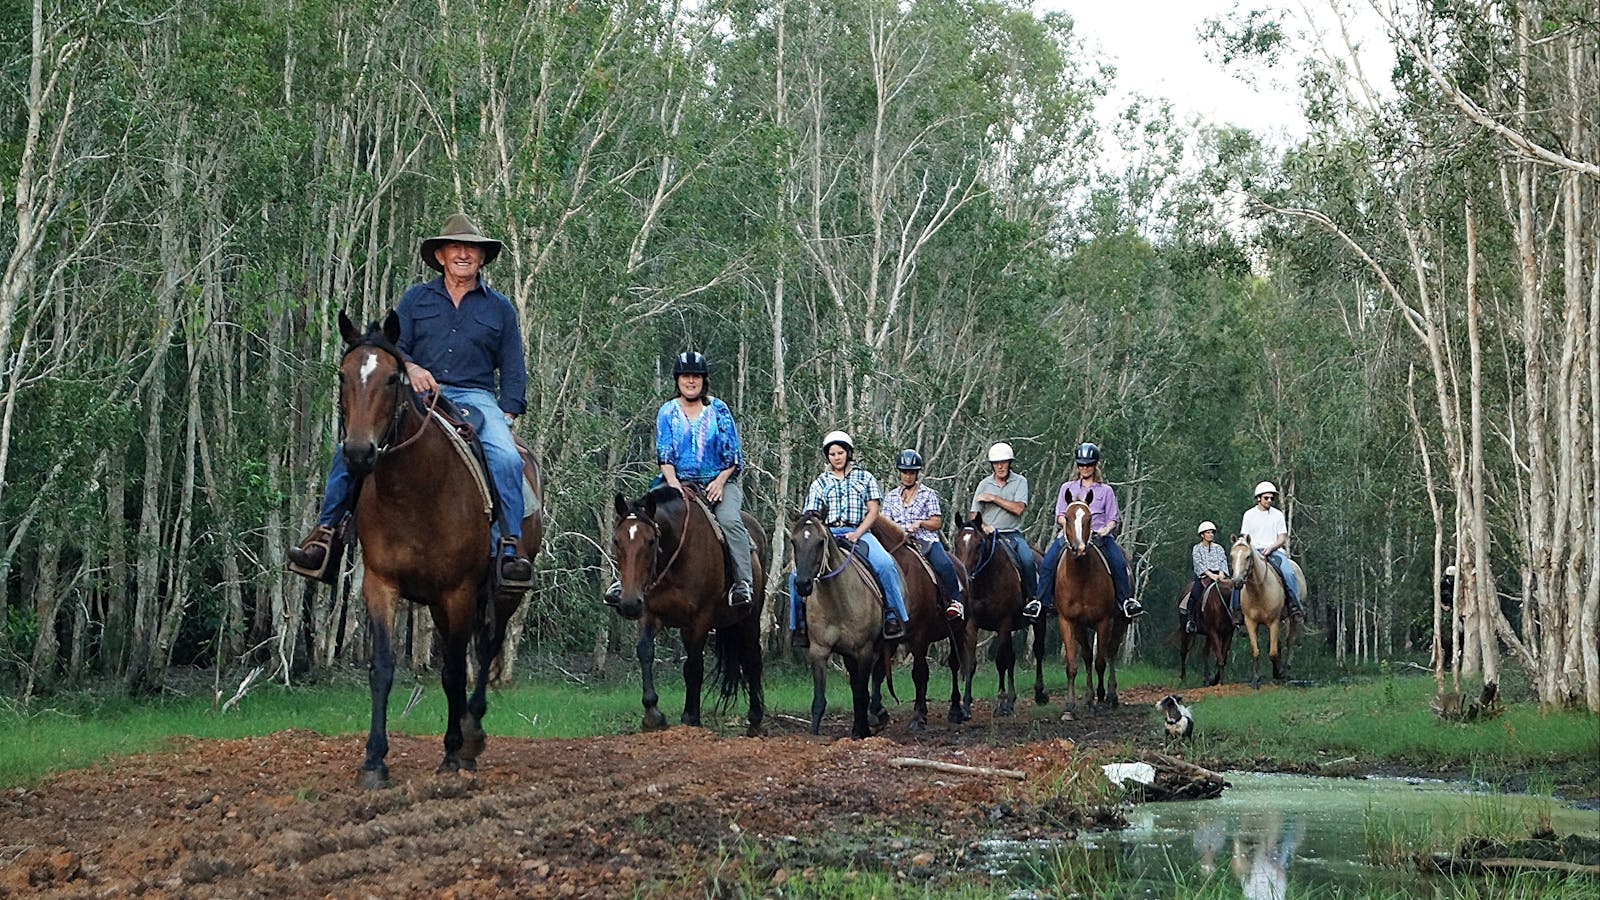 Horse back riding through the property with Norman McLean leading